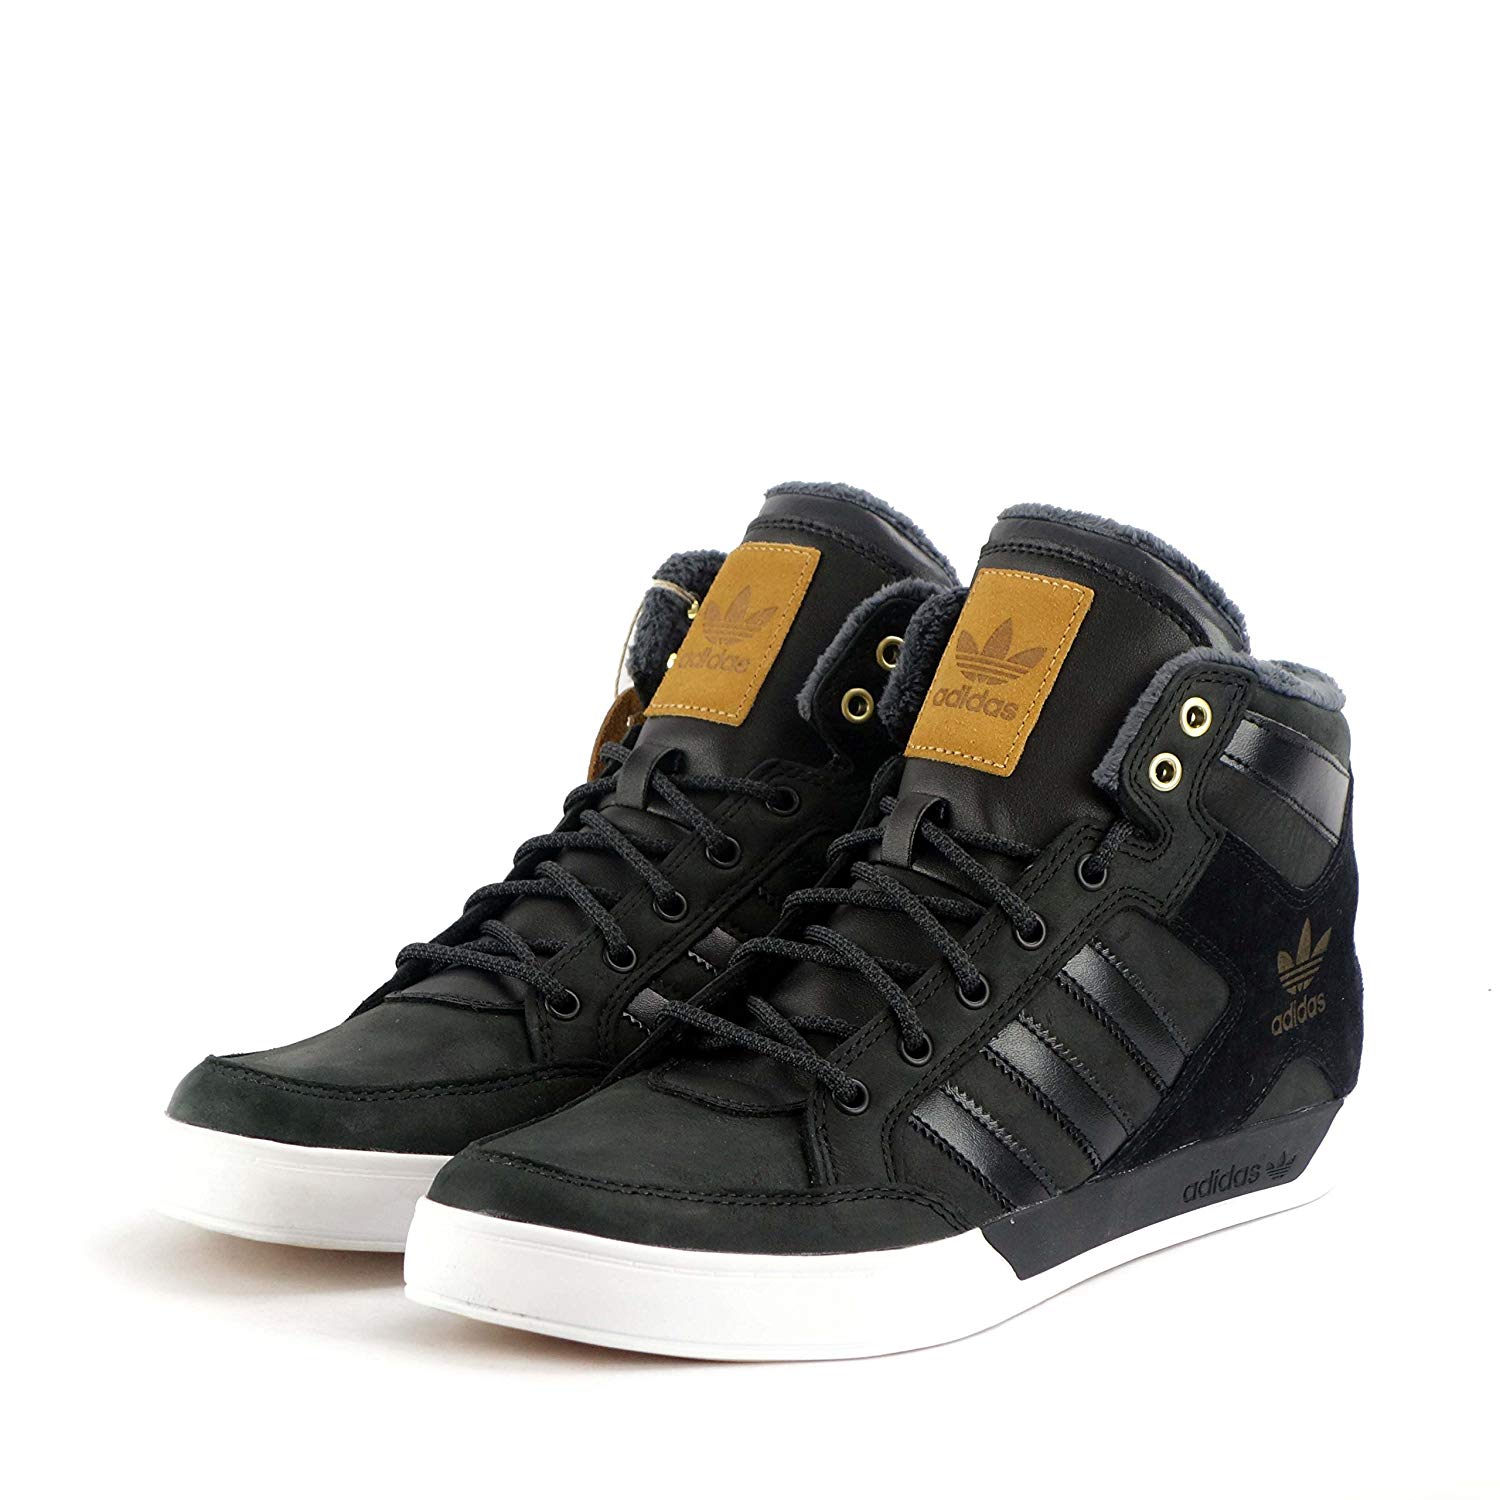 adidas hardcourt waxy crafted homme chaussures